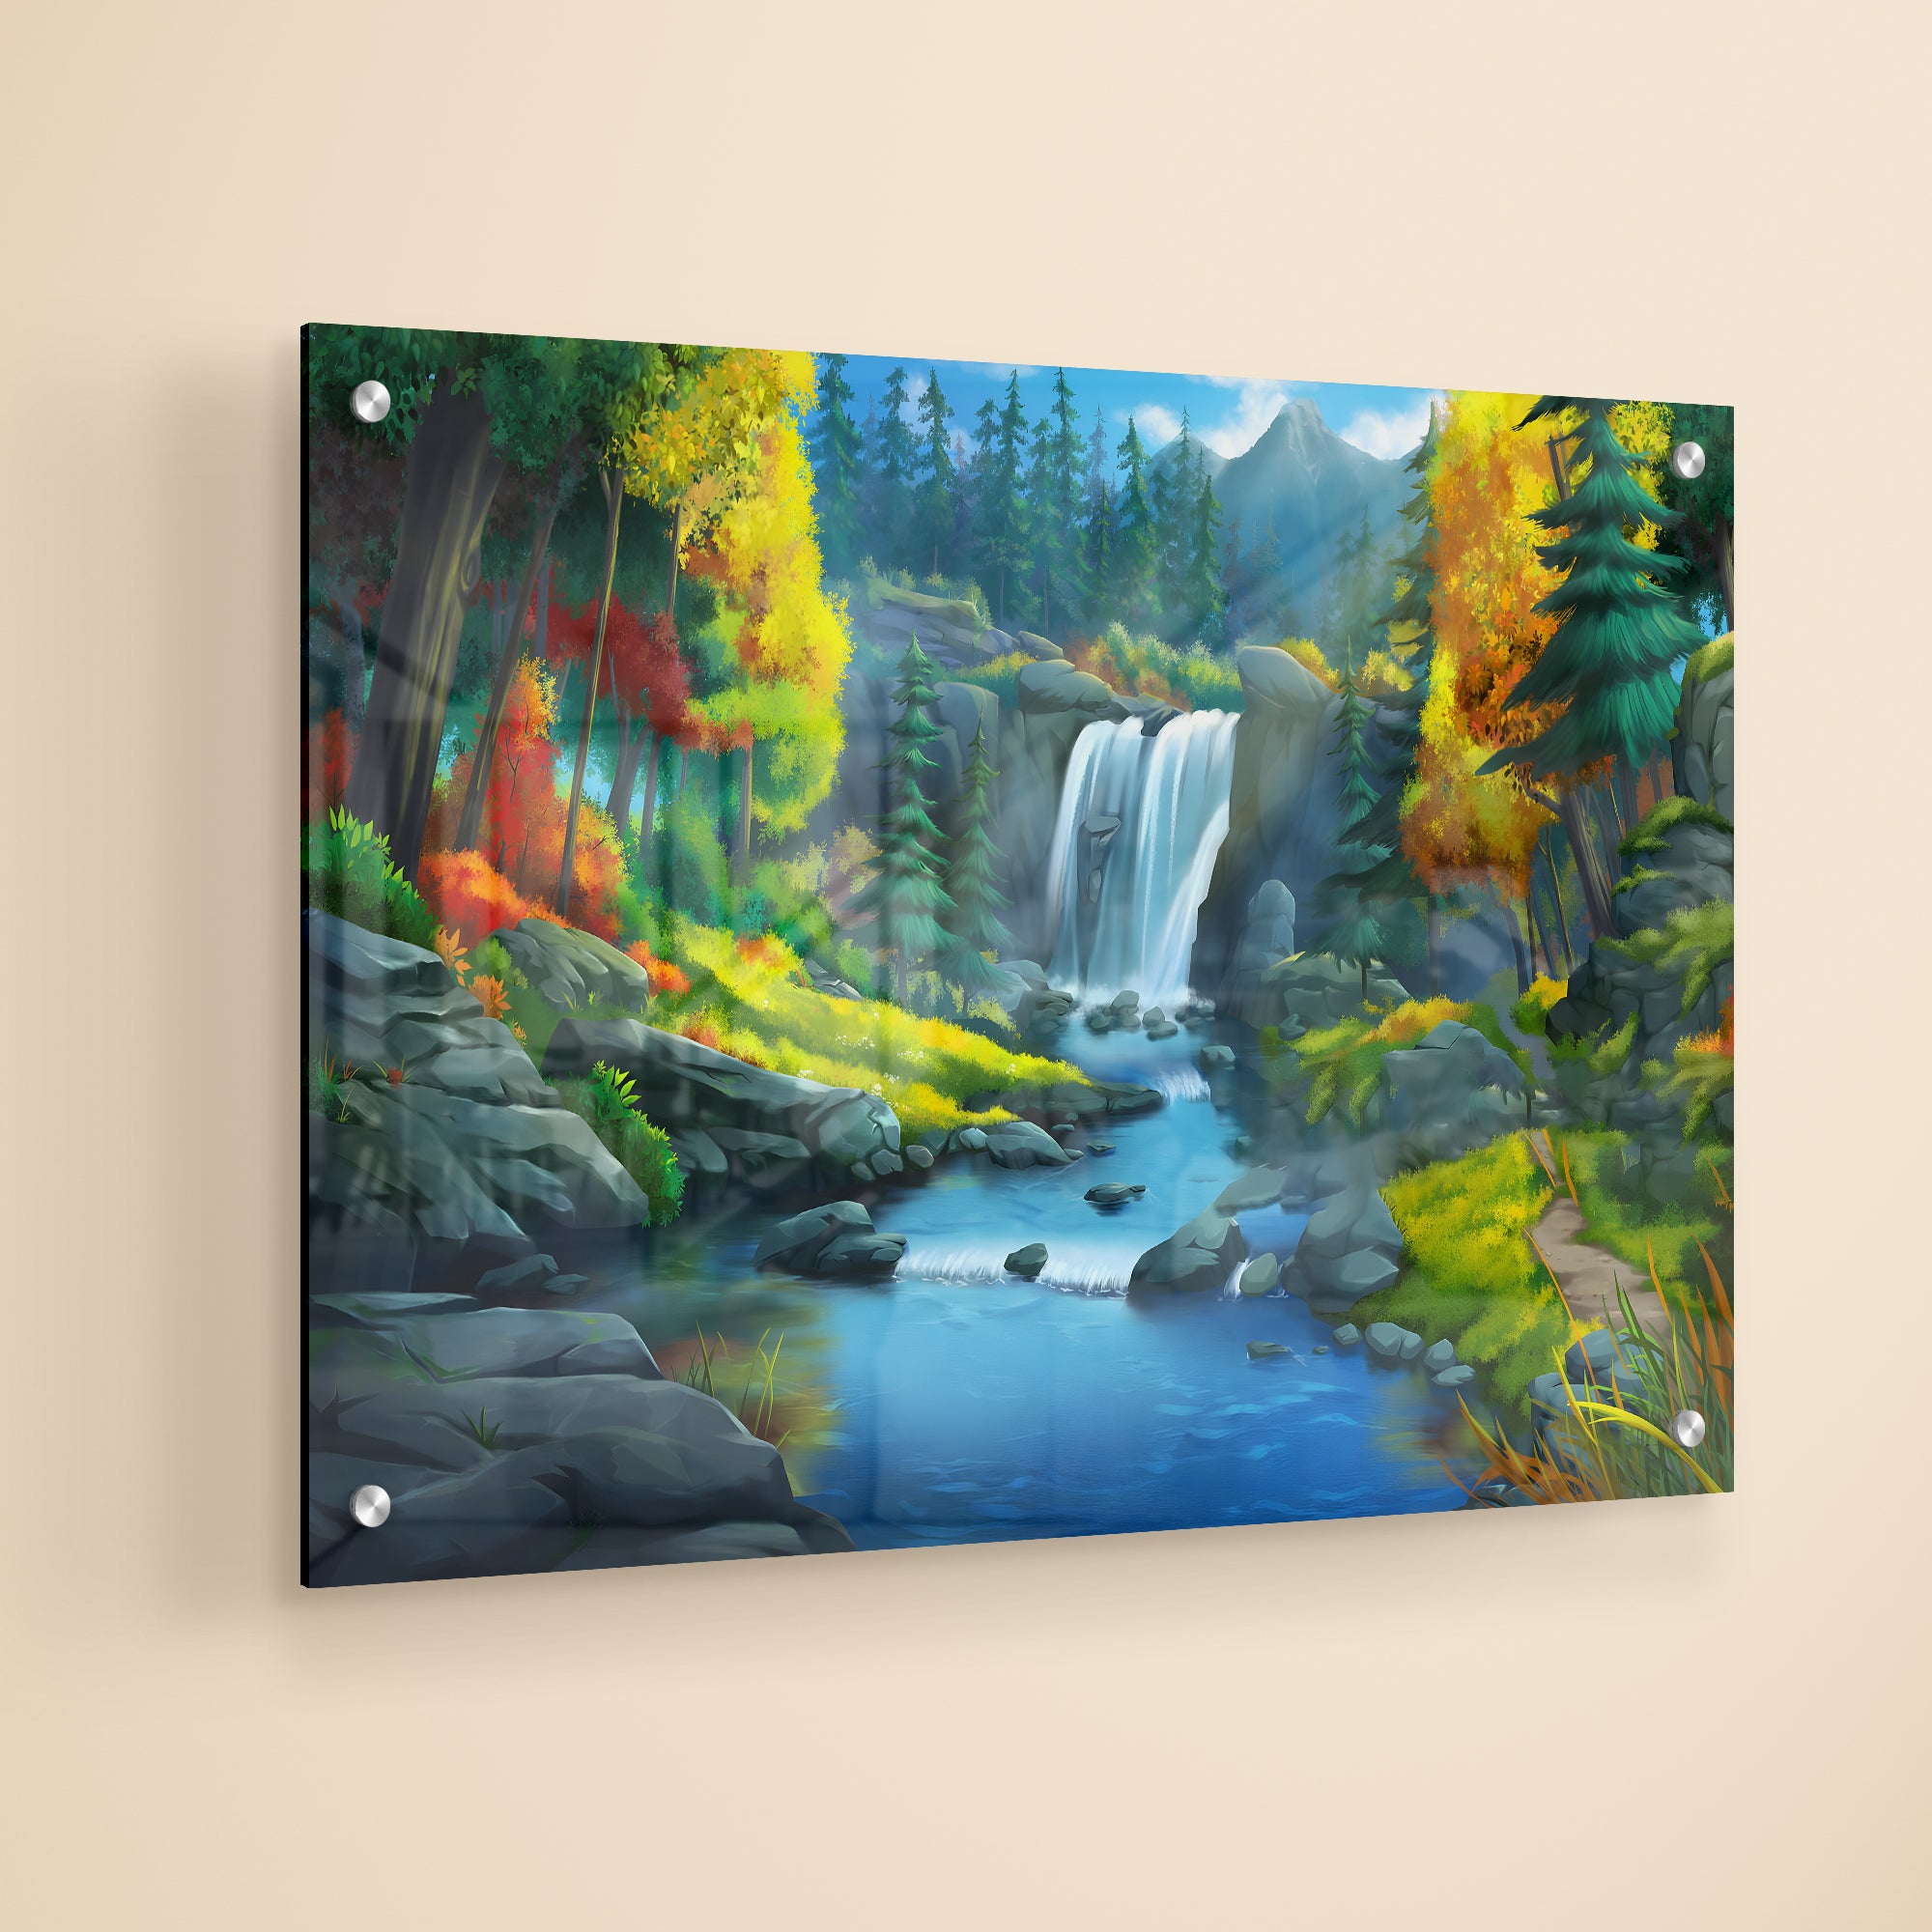 Beautiful Waterfall In Forest Premium Morden Art Acrylic Painting